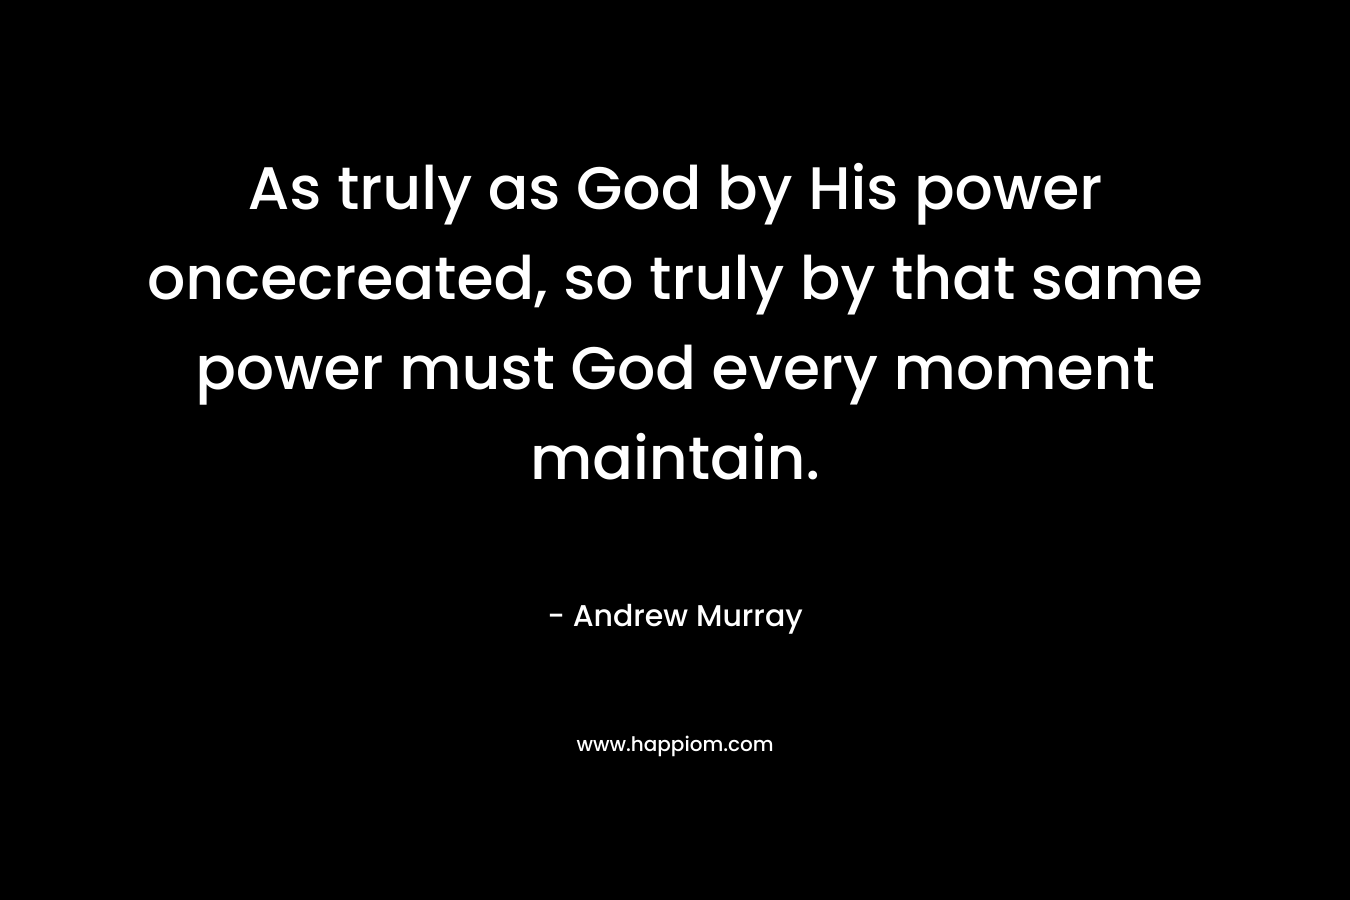 As truly as God by His power oncecreated, so truly by that same power must God every moment maintain. – Andrew Murray